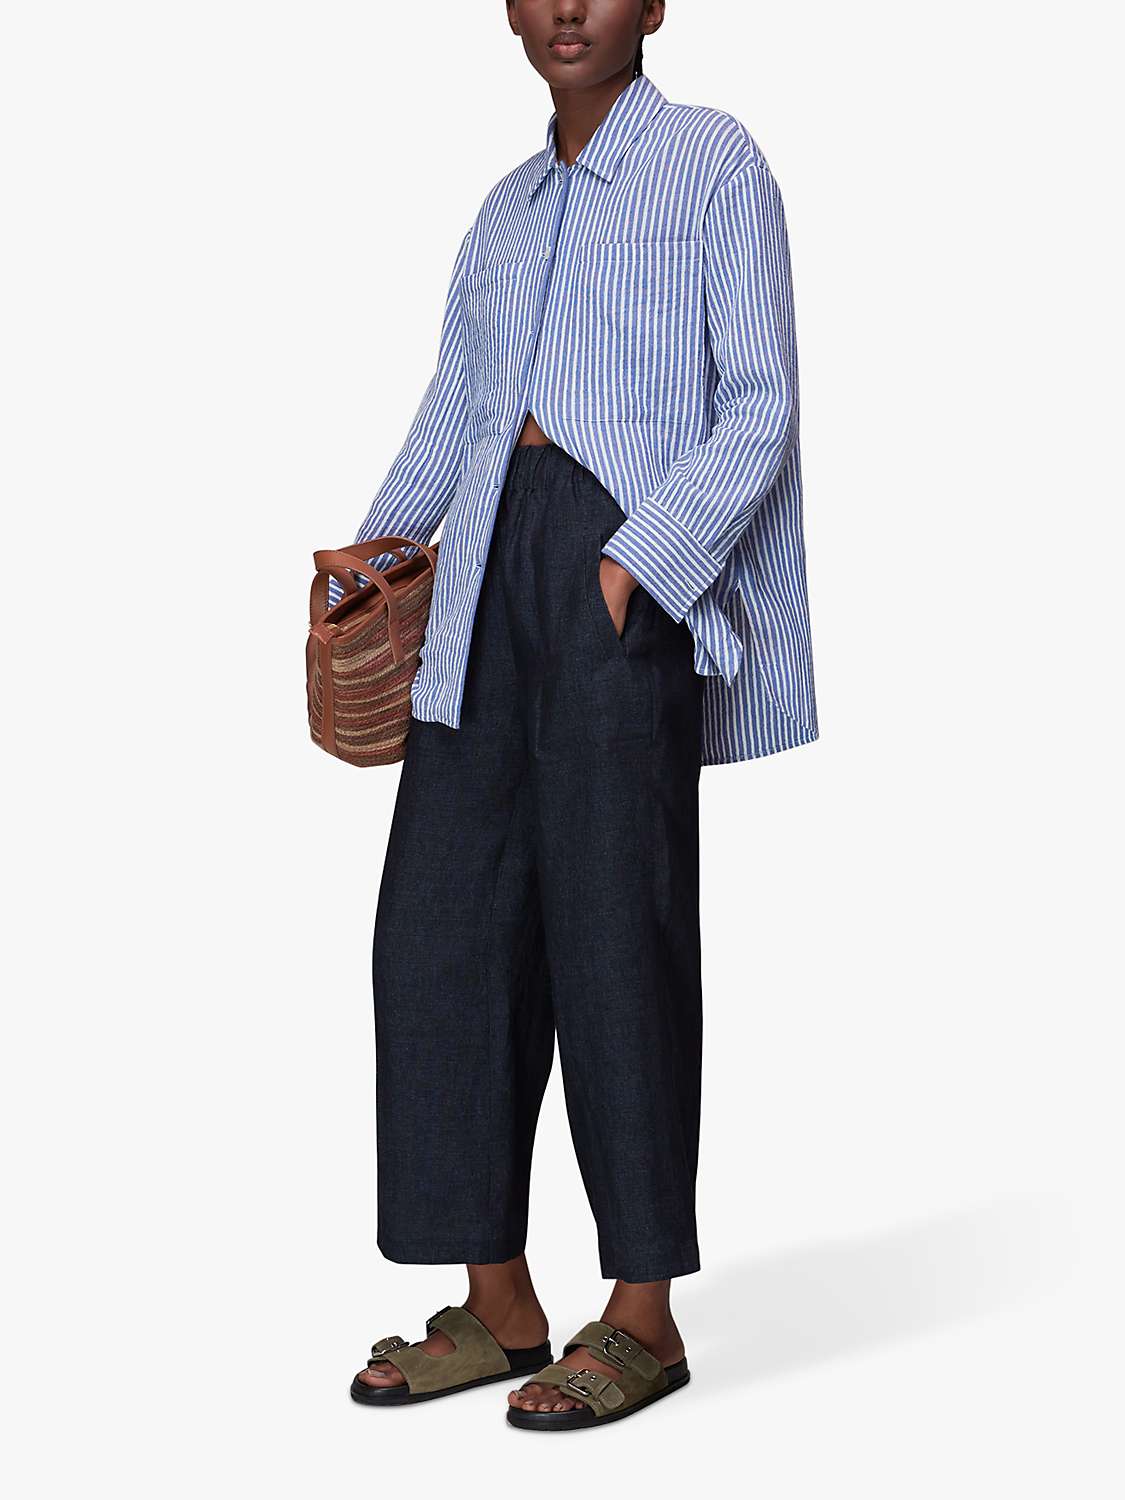 Buy Whistles Linen Trousers, Navy Online at johnlewis.com